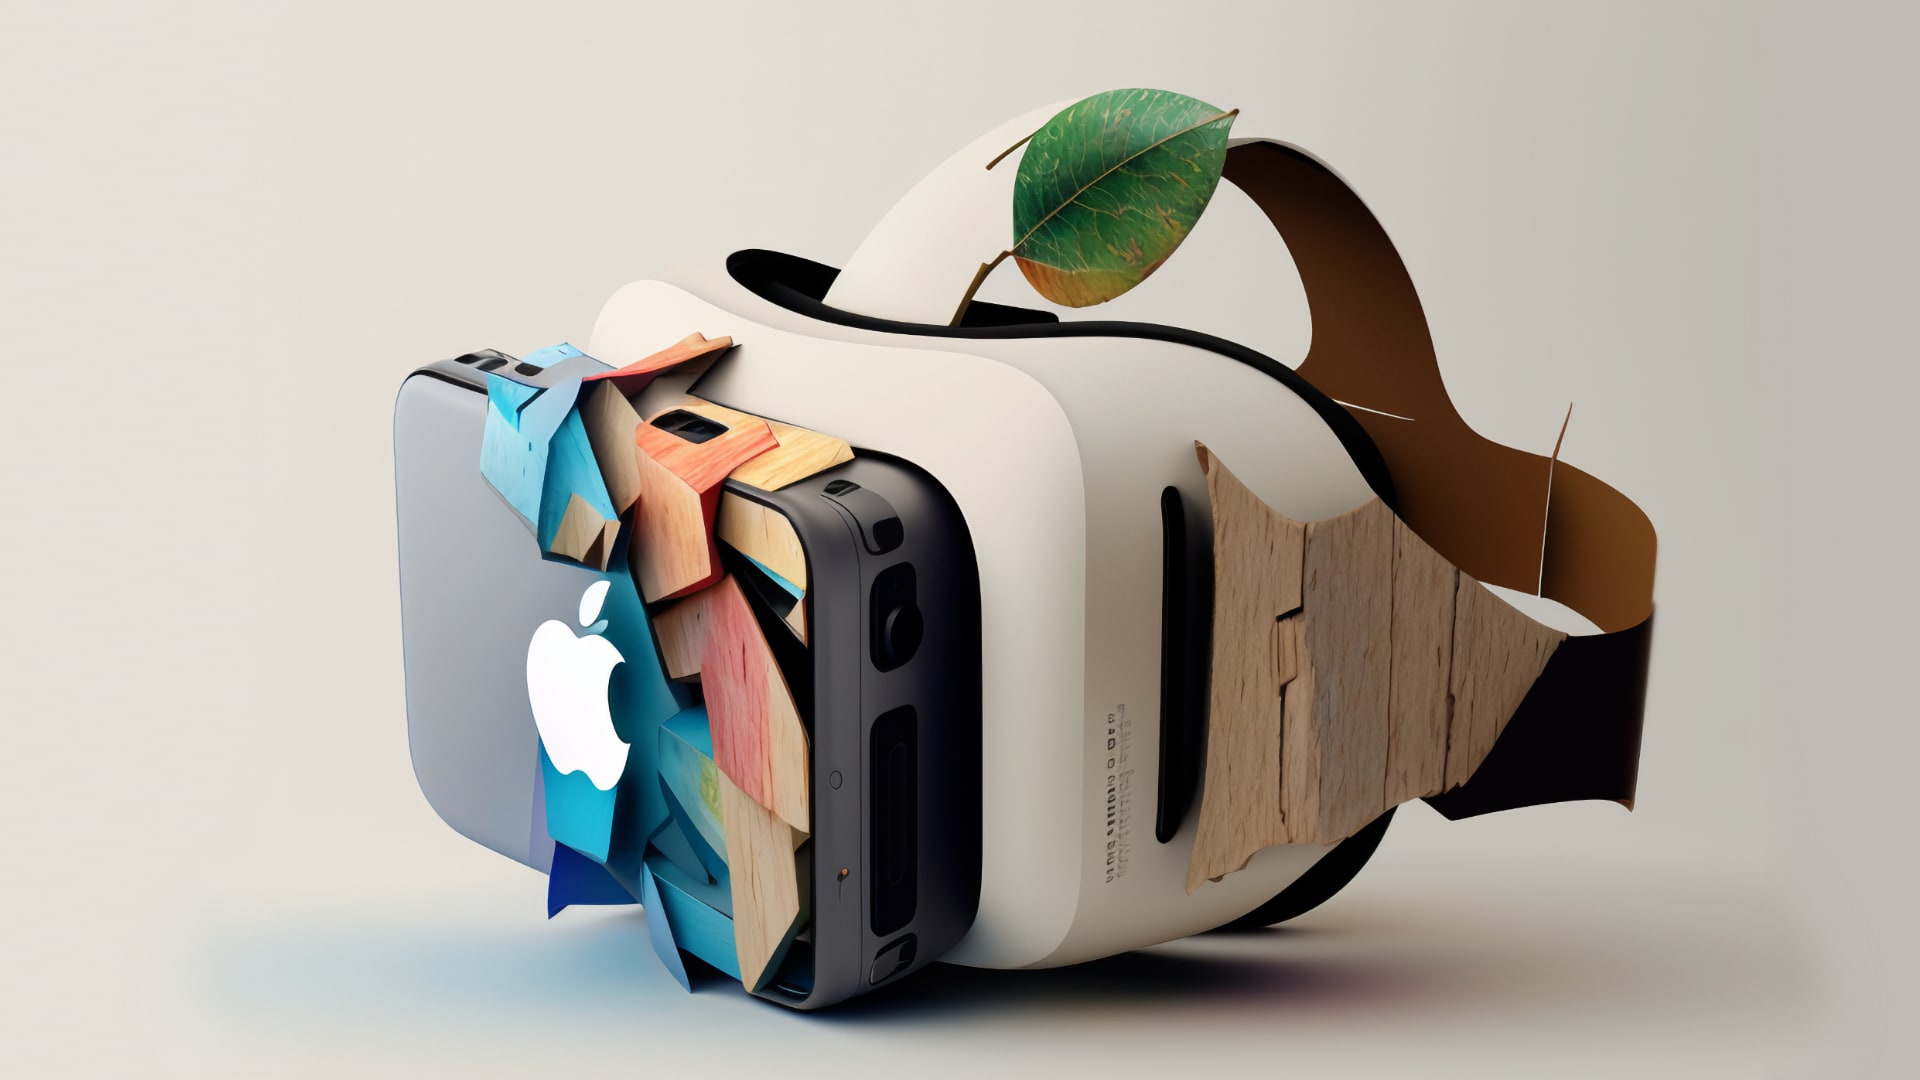 How Apple’s VR headset could beat Meta at its own game